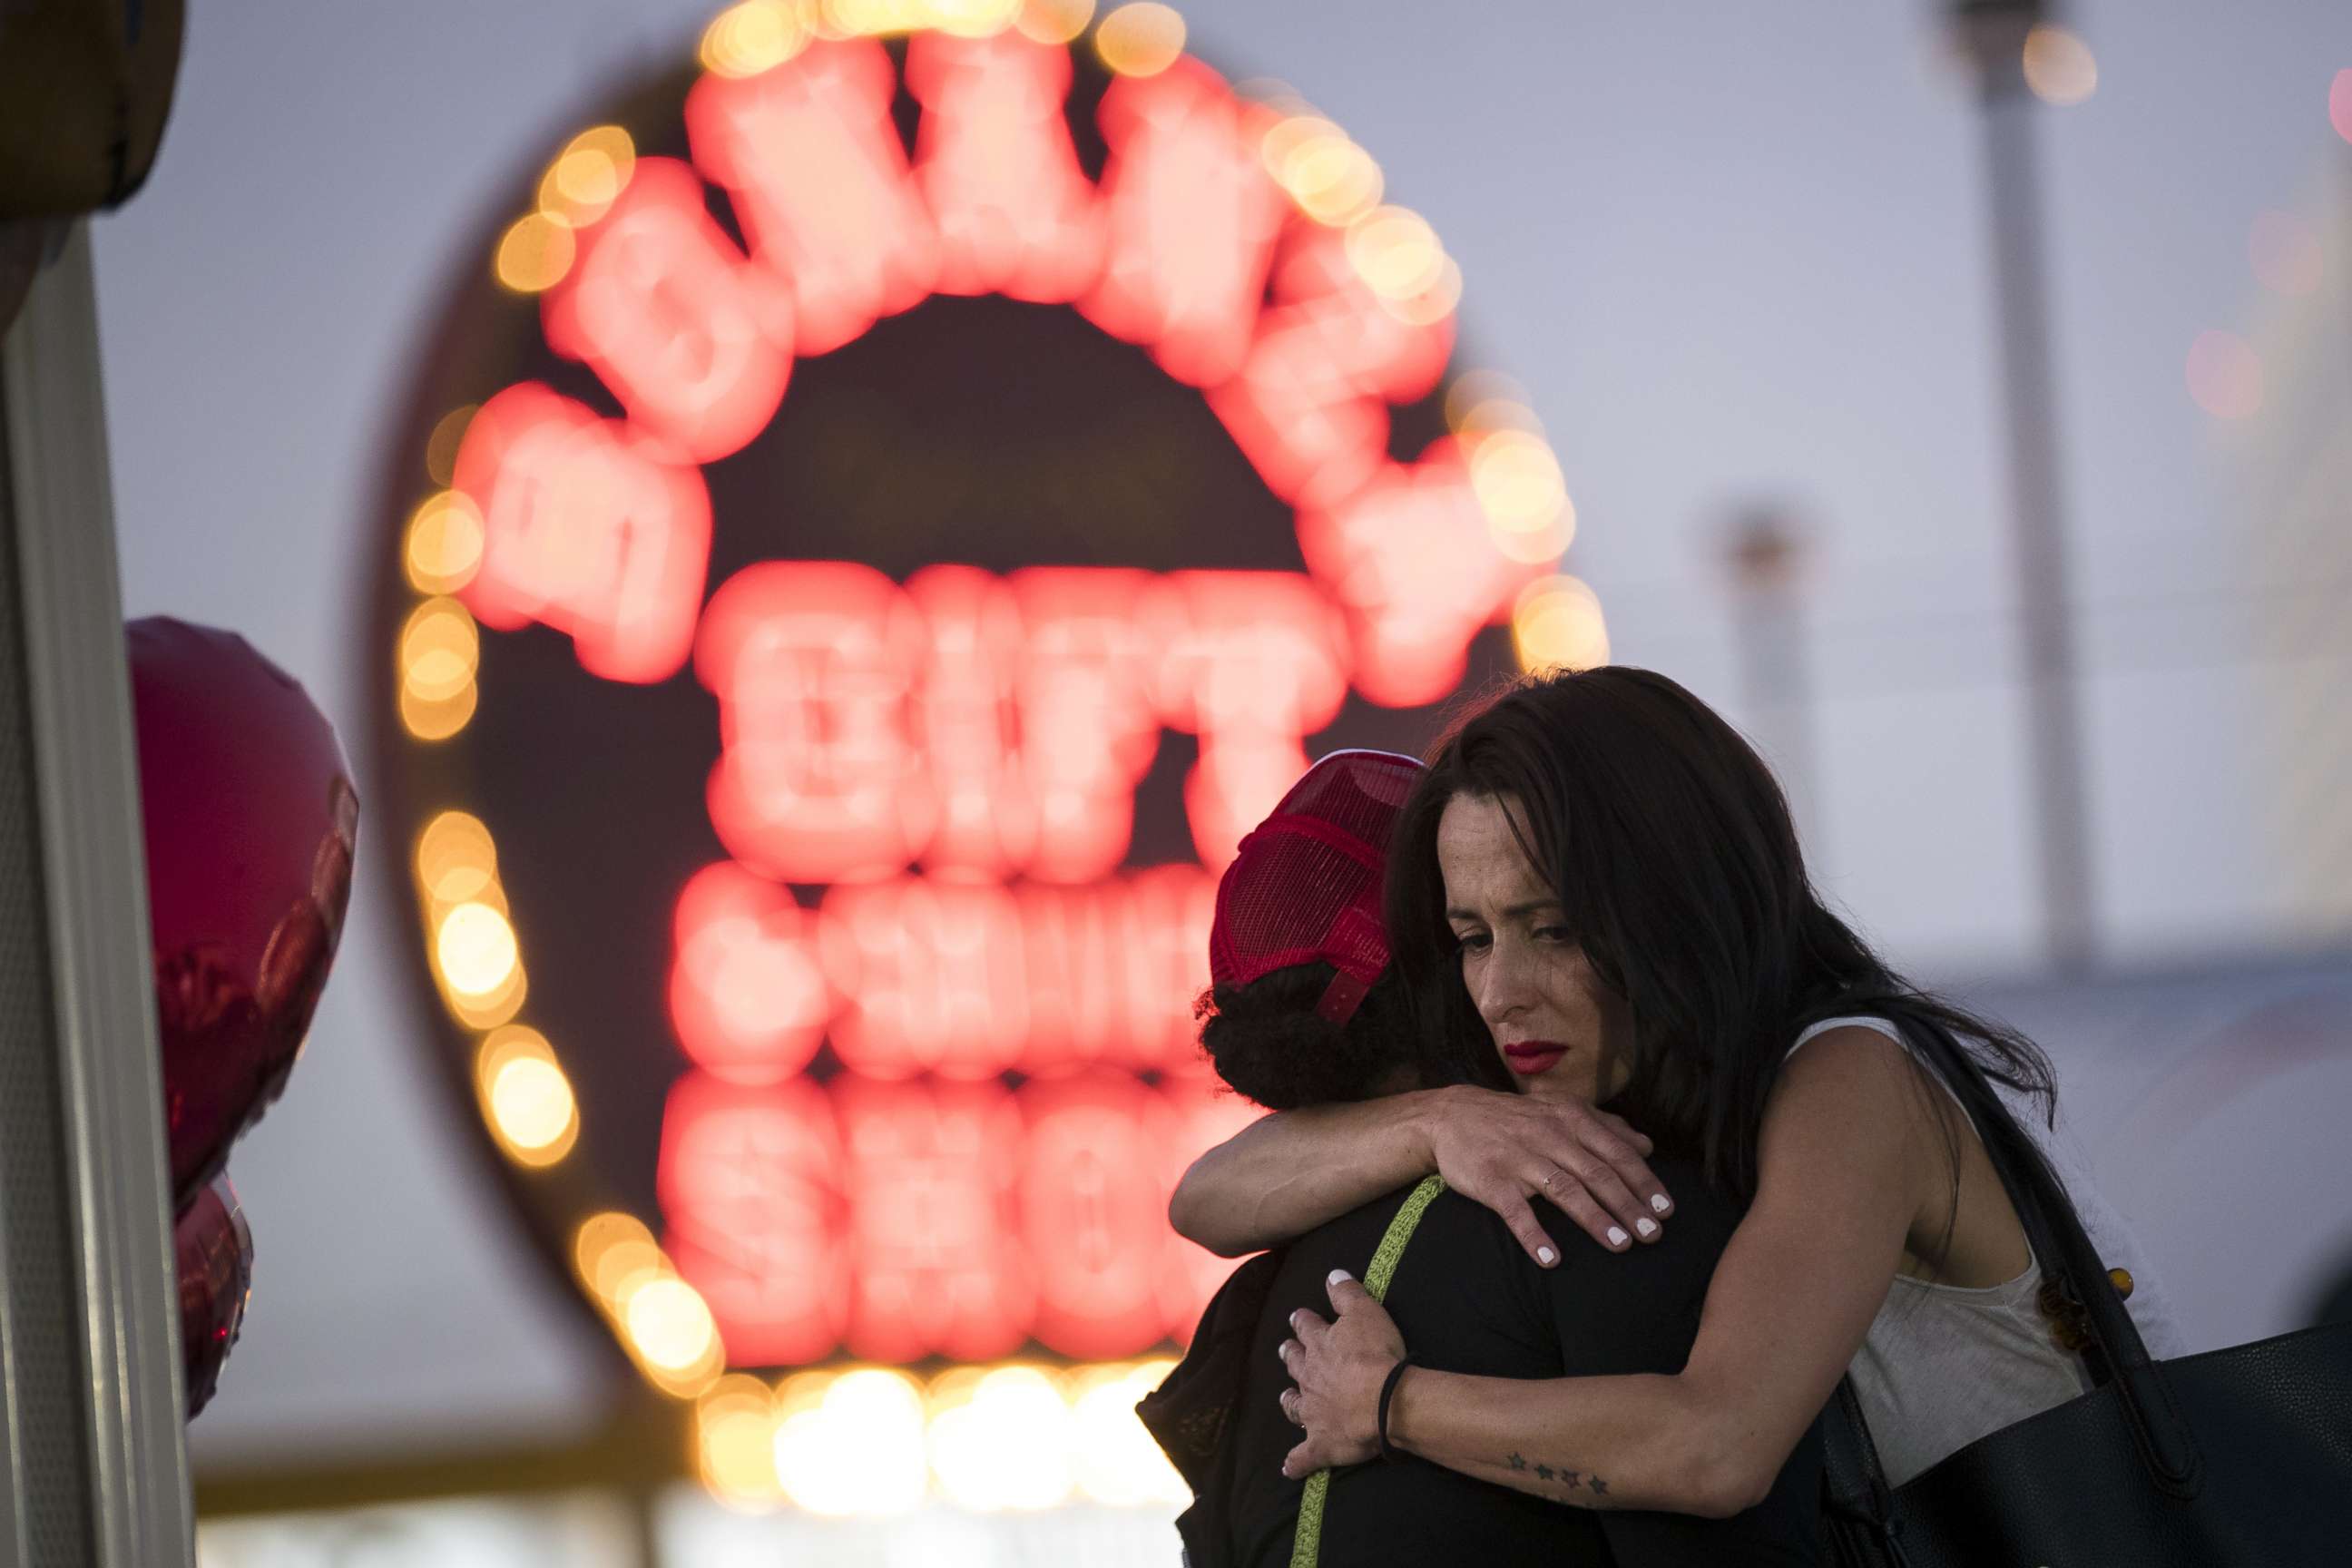 PHOTO: Las Vegas resident Elisabeth Apcar, right, hugs a woman at a makeshift memorial on the Last Vegas Strip, Oct. 4, 2017, three days after a mass shooting.